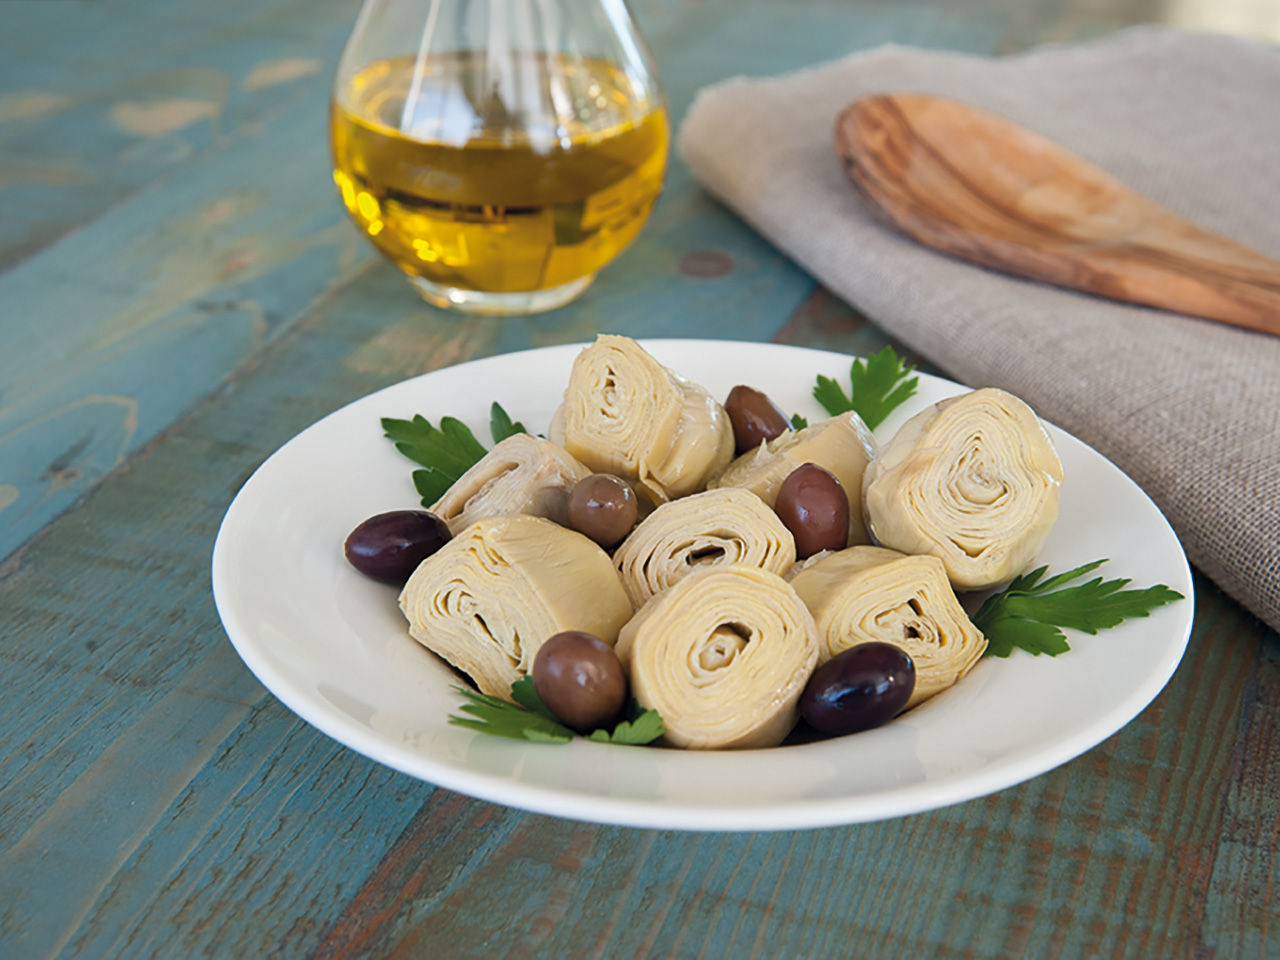 Artichoke hearts with olives